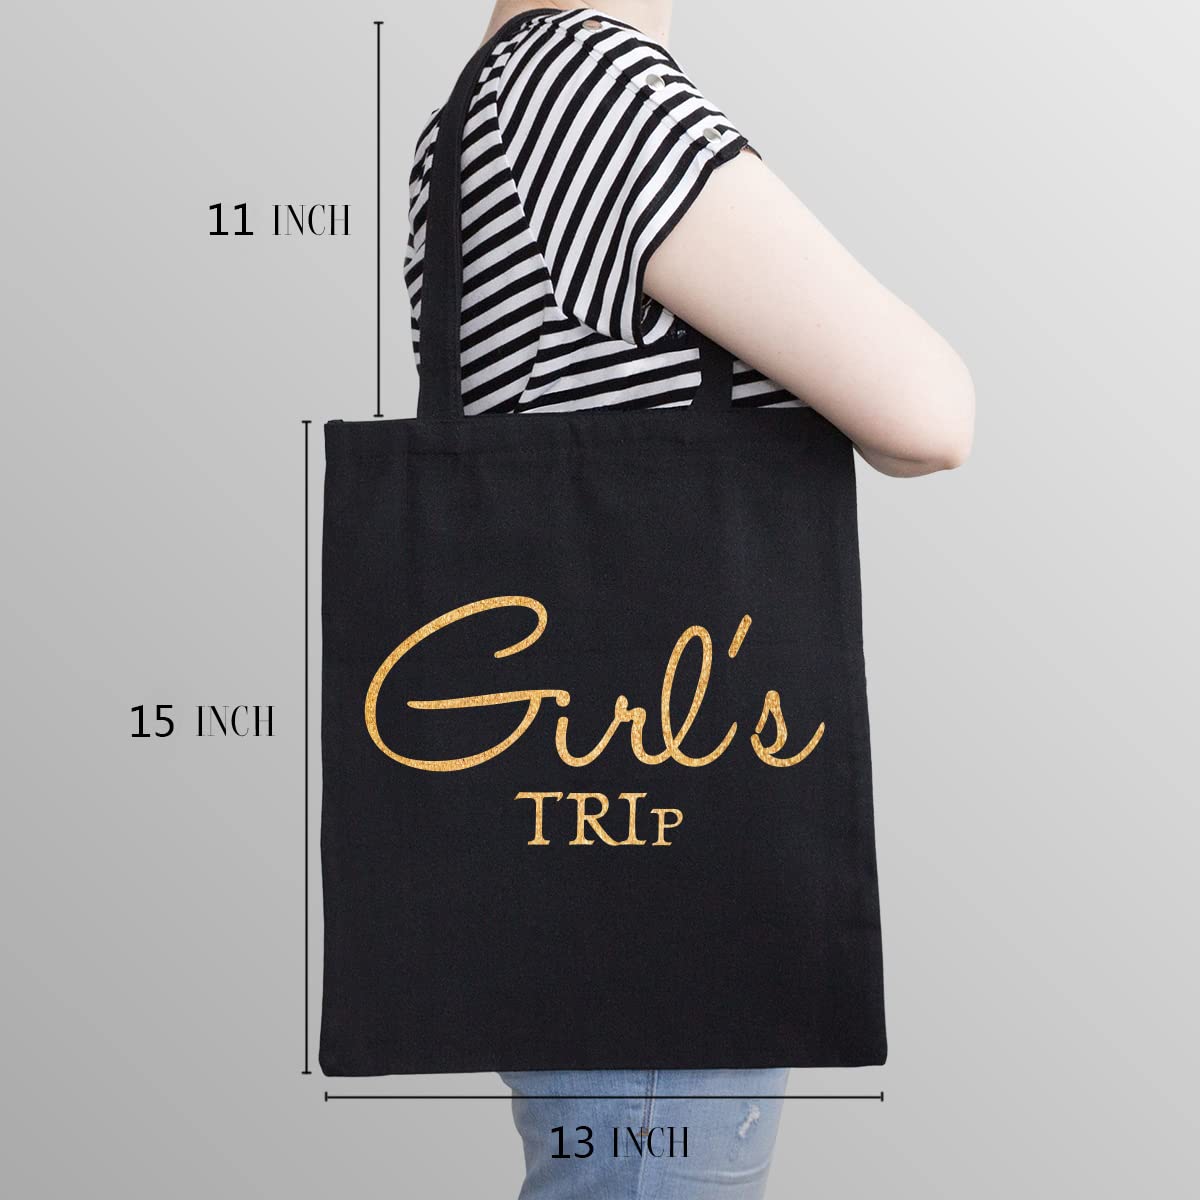 QIONGQI Funny Girl's Trip Natural Cotton Girl Reusable Tote Bag, Cute Printed Eco-Friendly Cotton Tote Bag Totes Gifts for Teens Women Girls Best Friends(black)